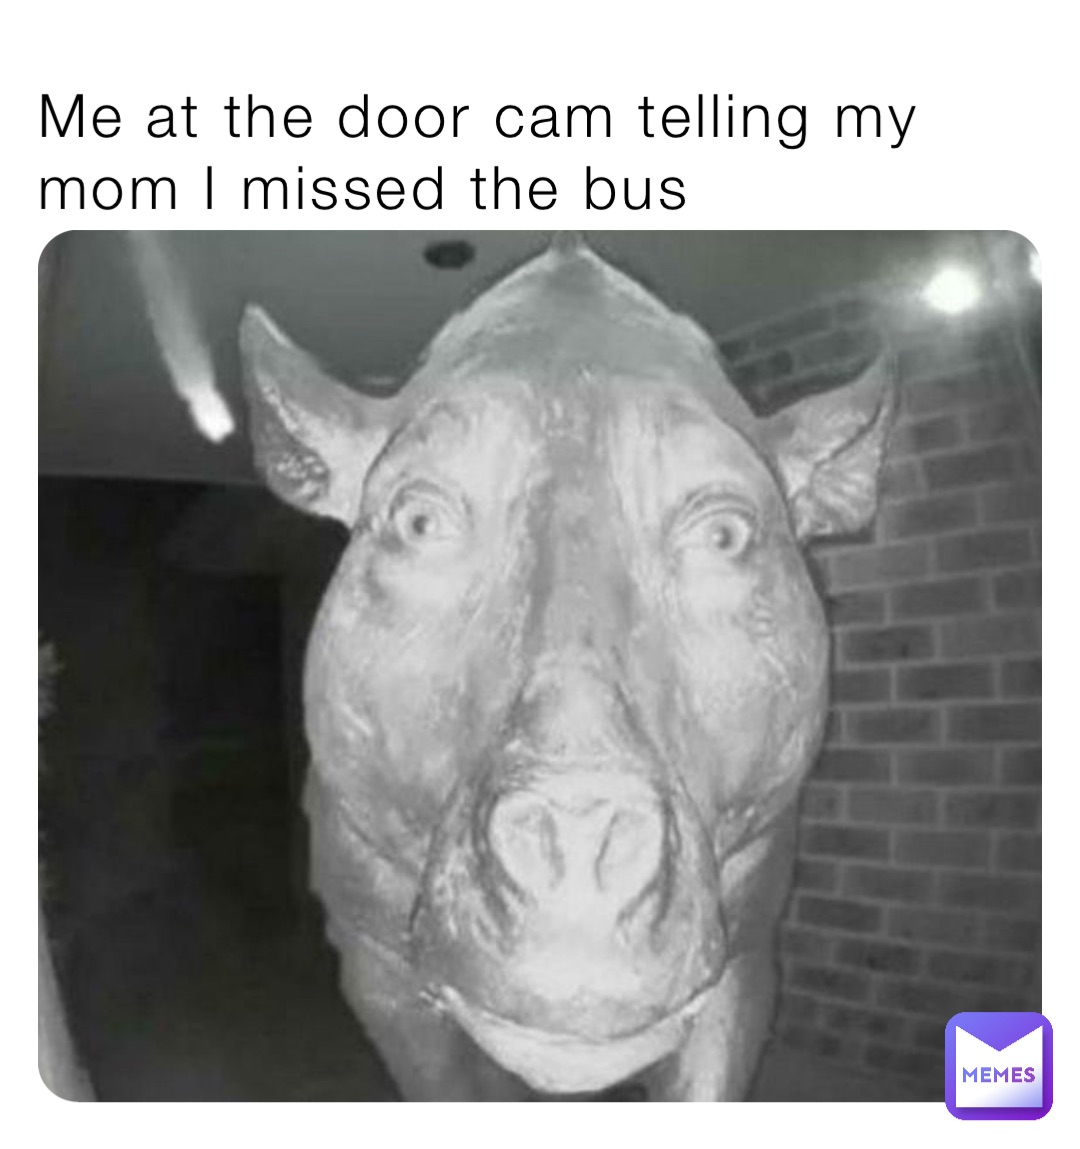 Me at the door cam telling my mom I missed the bus